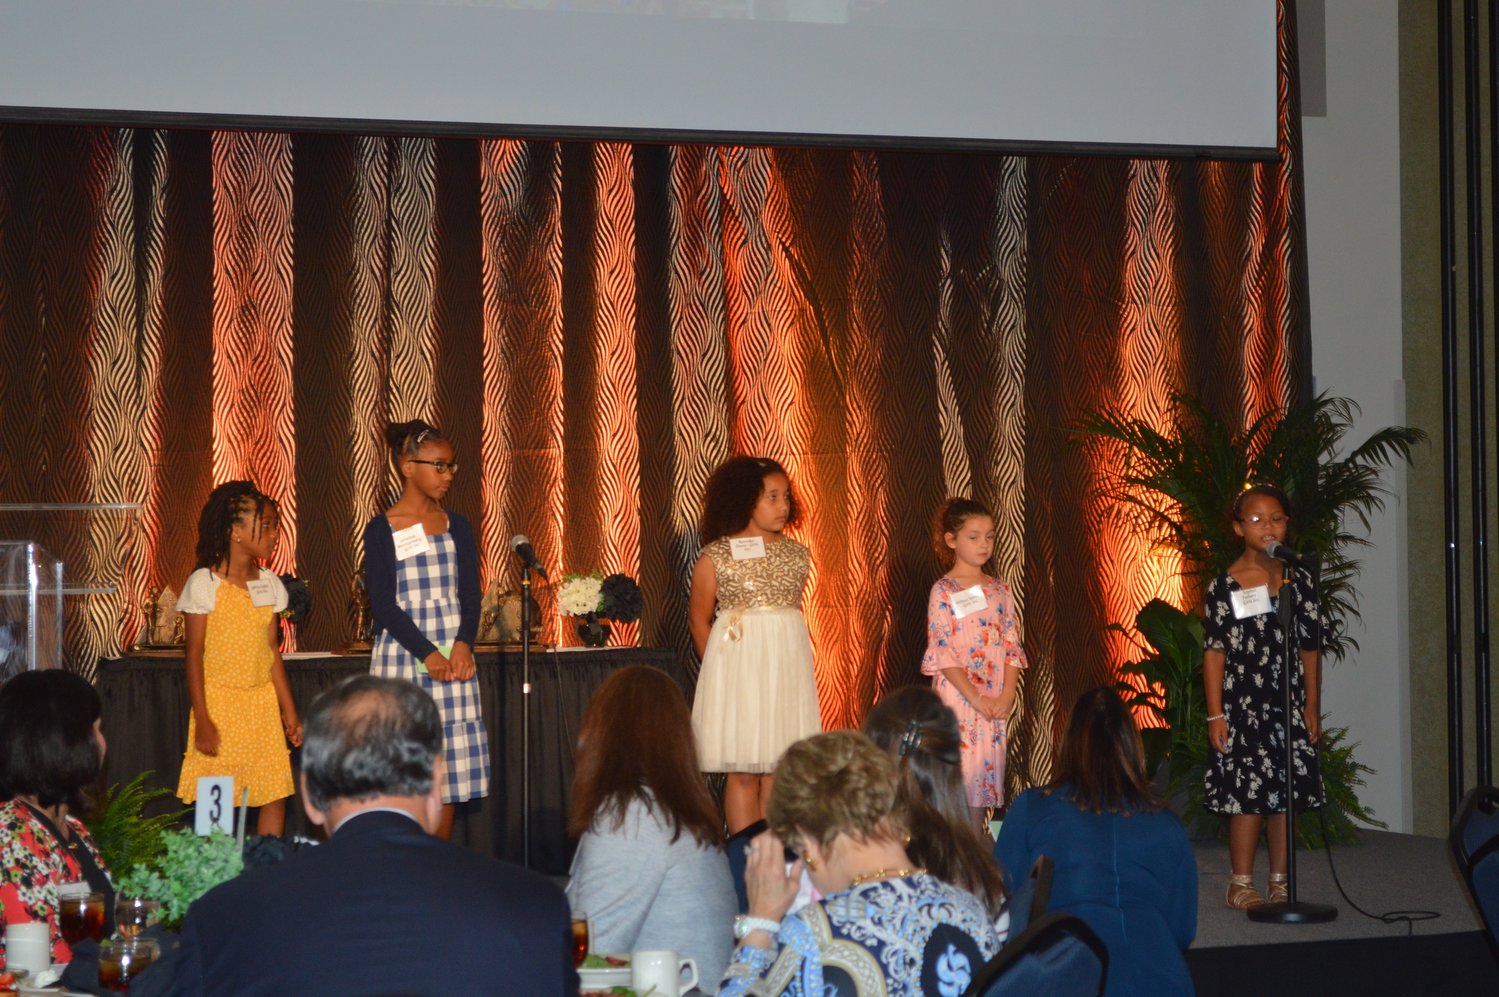 Five students from Girls Inc. perform their skit, “When I Grow Up,” at the Junior Achievement of North Florida’s 2022 Hall of Fame Luncheon.